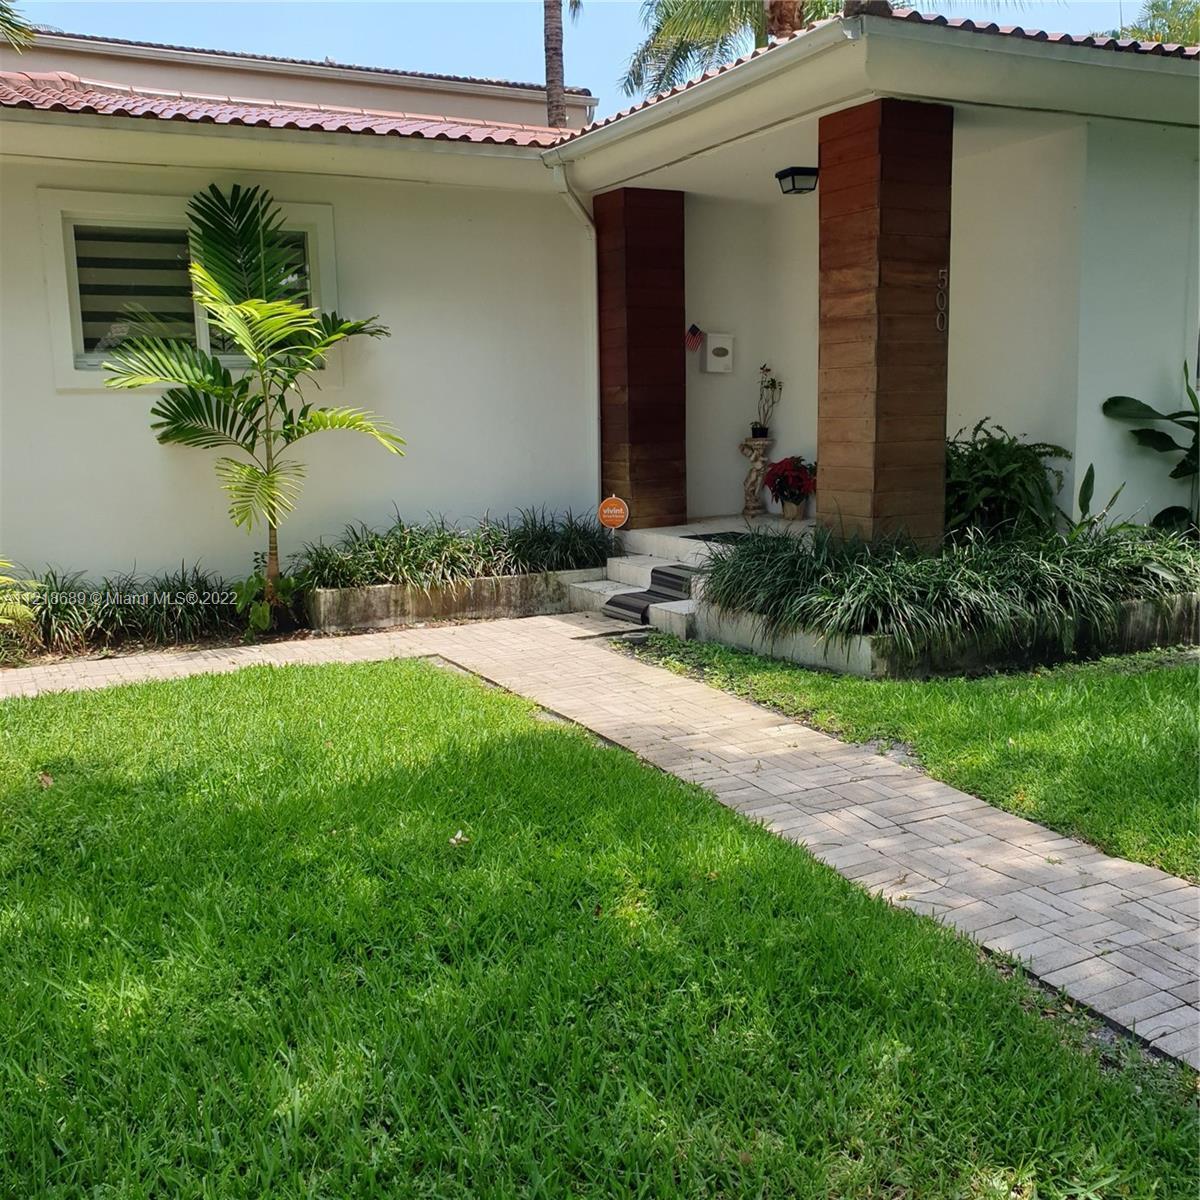 Totally remodelled 4/2.5 bath, On corner lot in central Miami Shores. New kitchen, stainless steel a